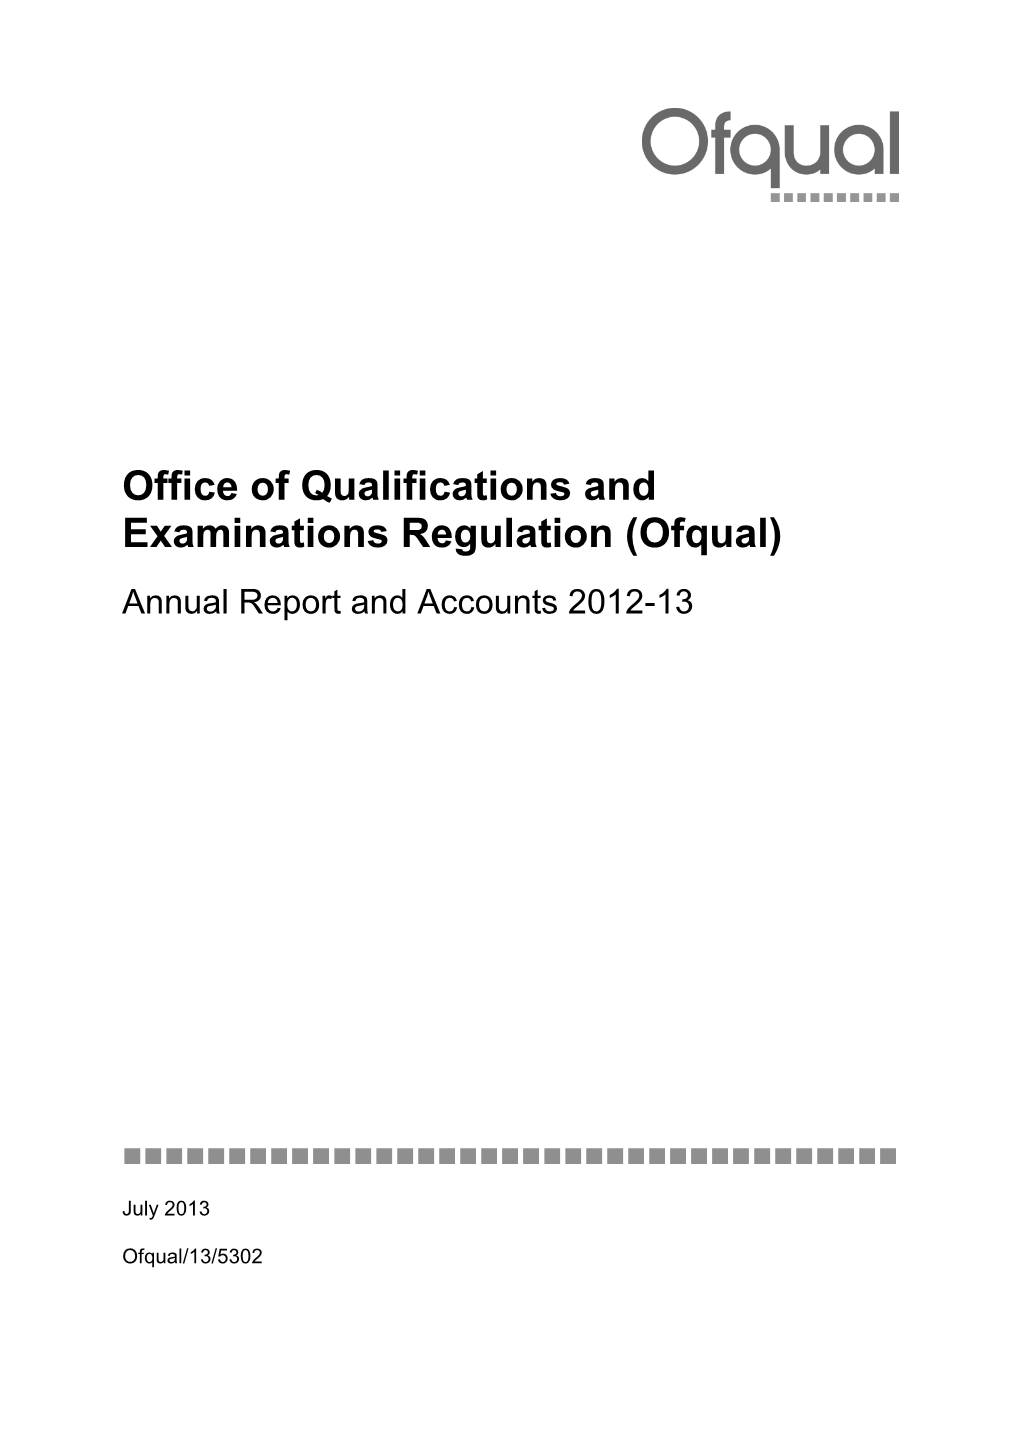 Office of Qualifications and Examinations Regulation (Ofqual) Annual Report and Accounts 2012-13